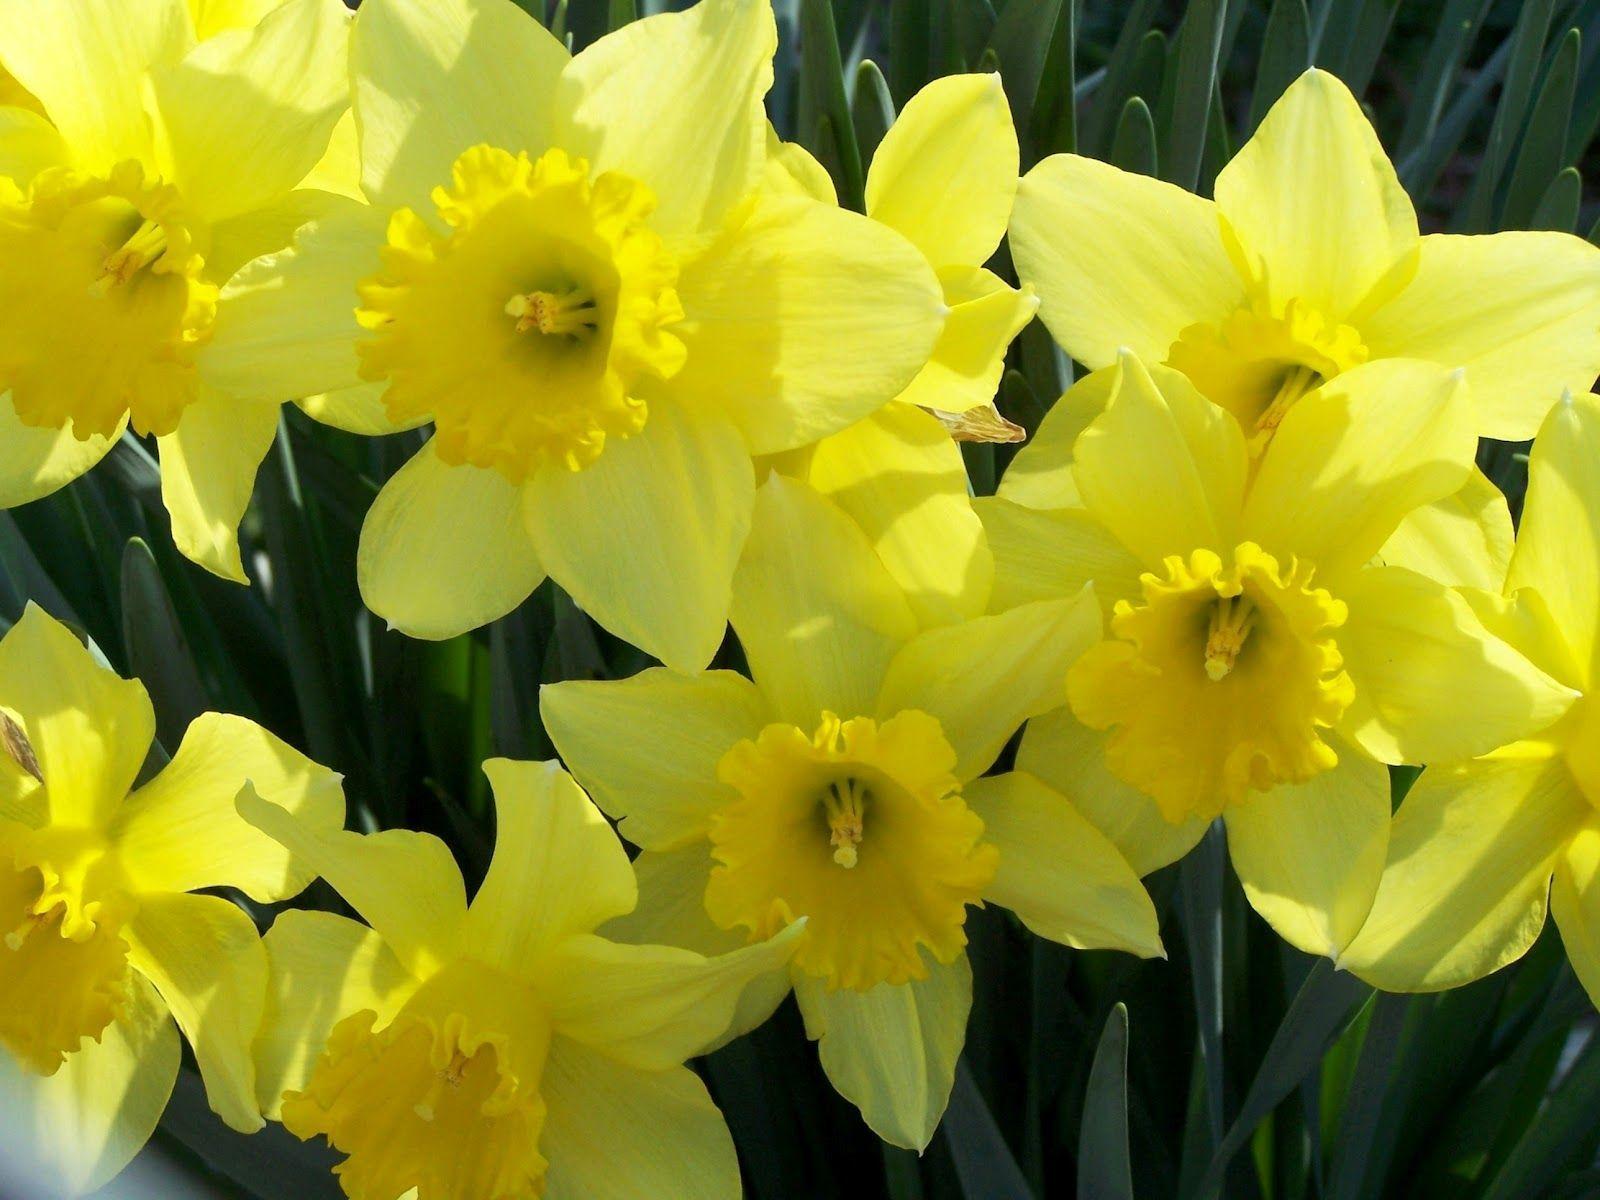 Gallery For > Daffodils Wallpaper